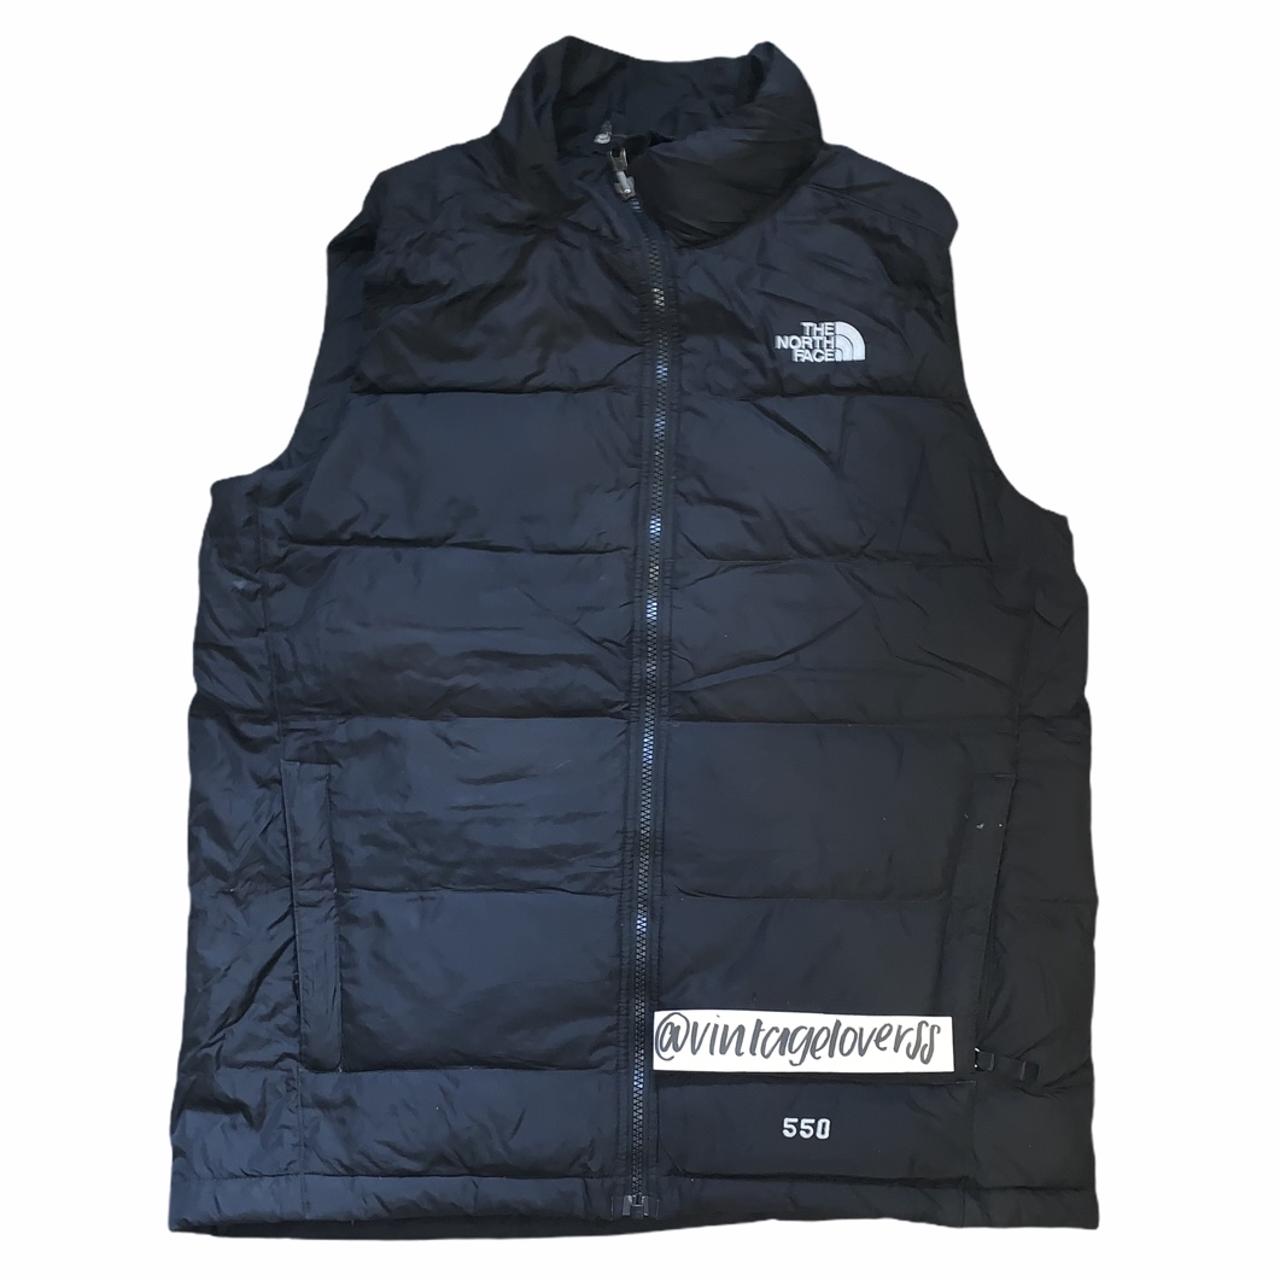 The north face TNF 550 Series Filled Sleeveless... - Depop